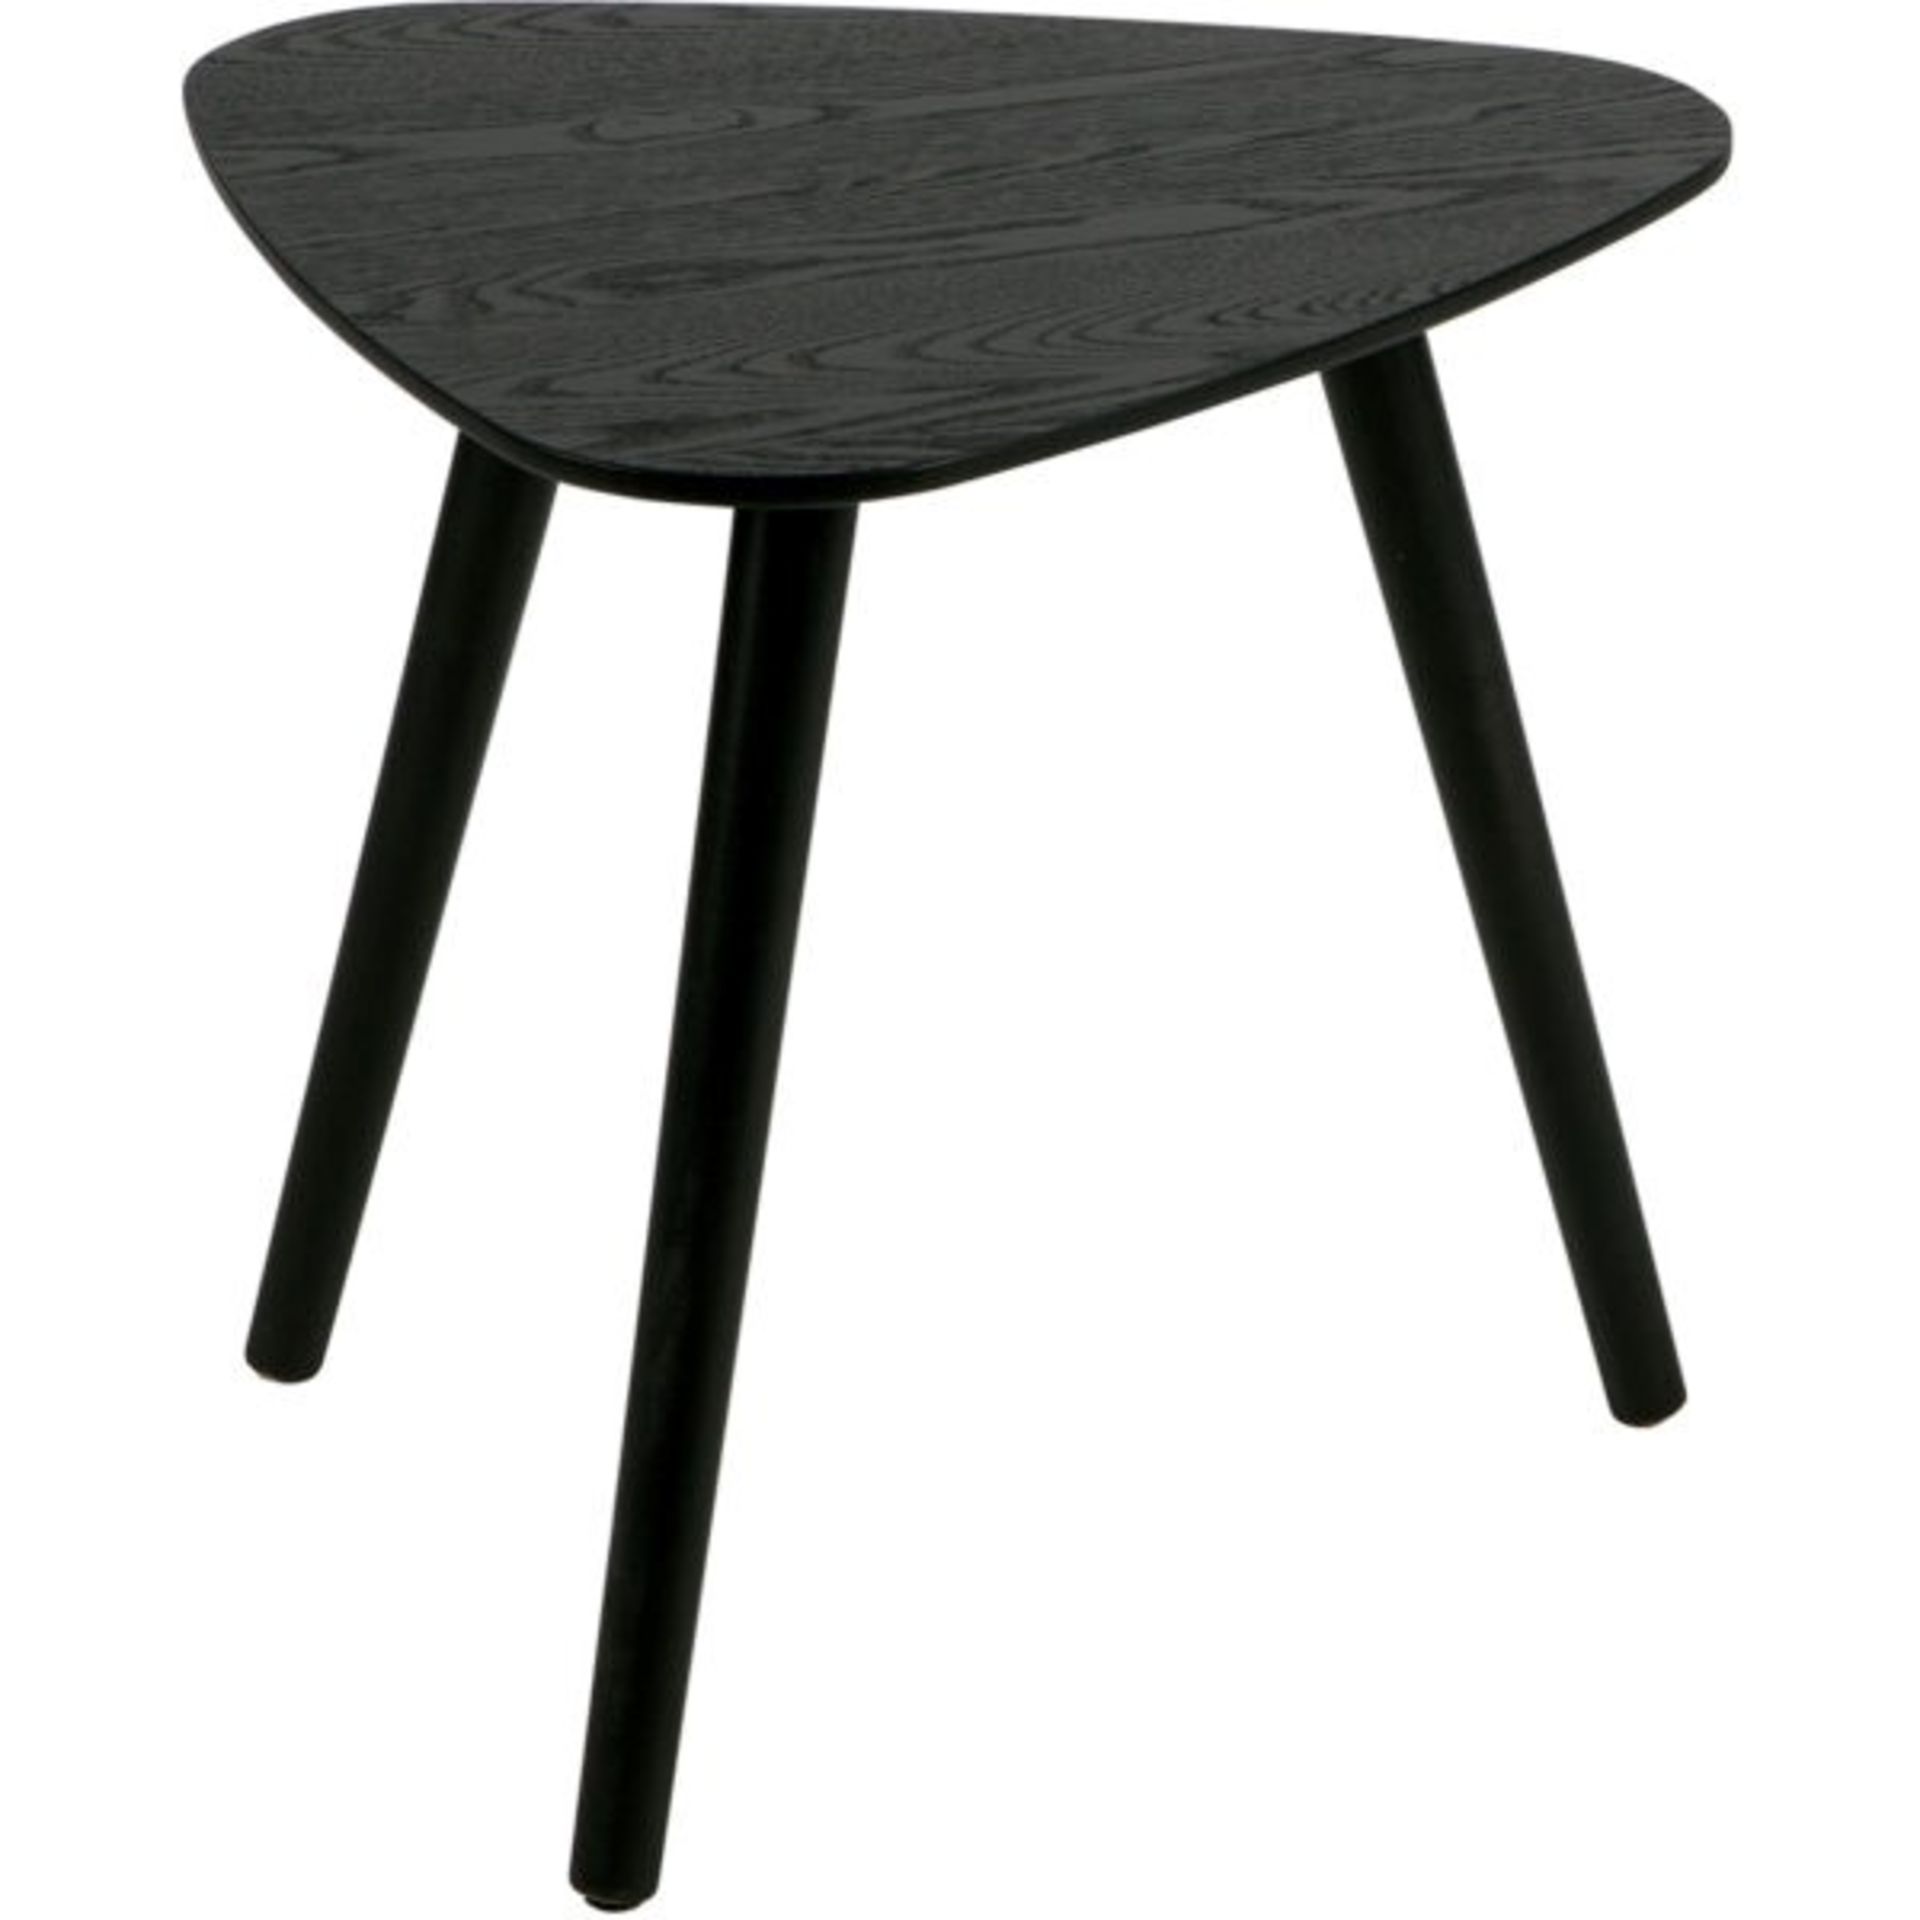 Set Of 2 x NILA Contemporary Wooden Side Tables In BLACK - Brand New Boxed Stock - CL508 - 715 / F4 - Image 4 of 6